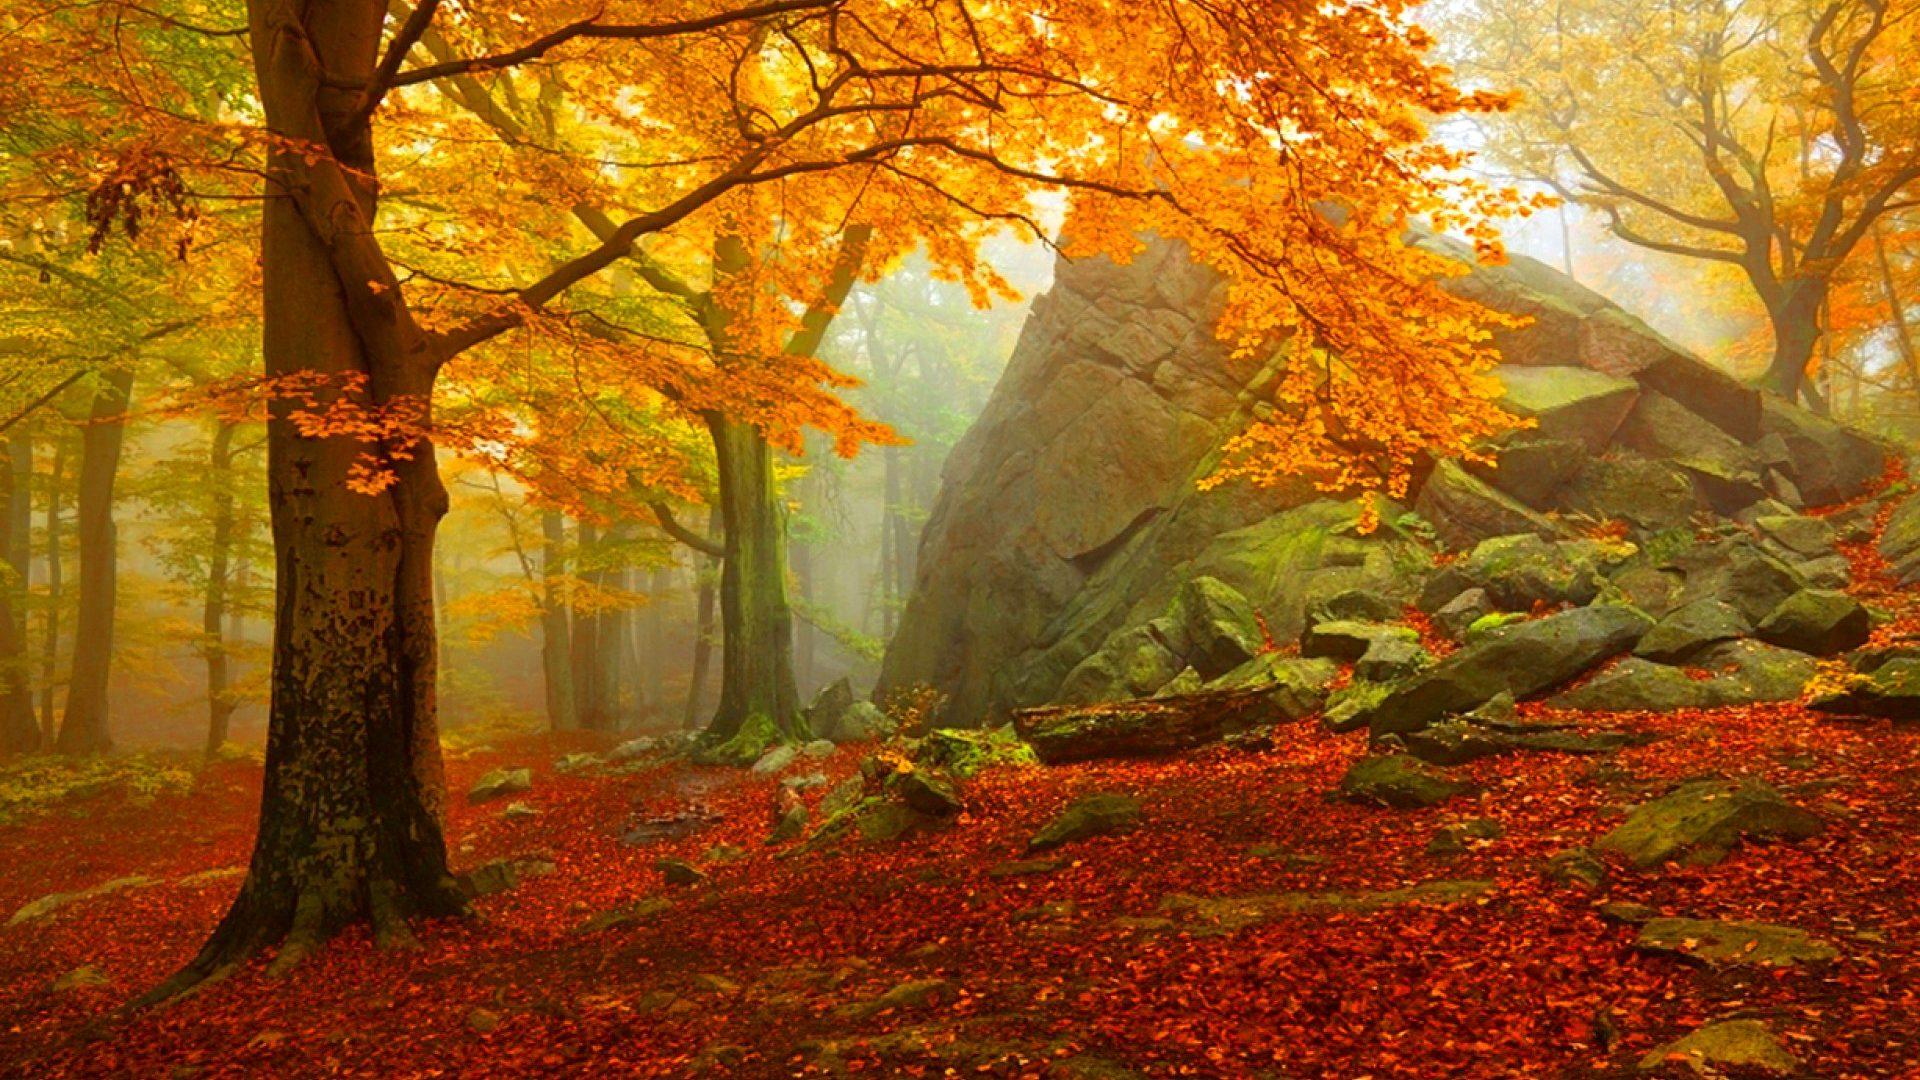 Autumn Tag wallpaper: Foggy Forest Autumn Leaves Wallpaper